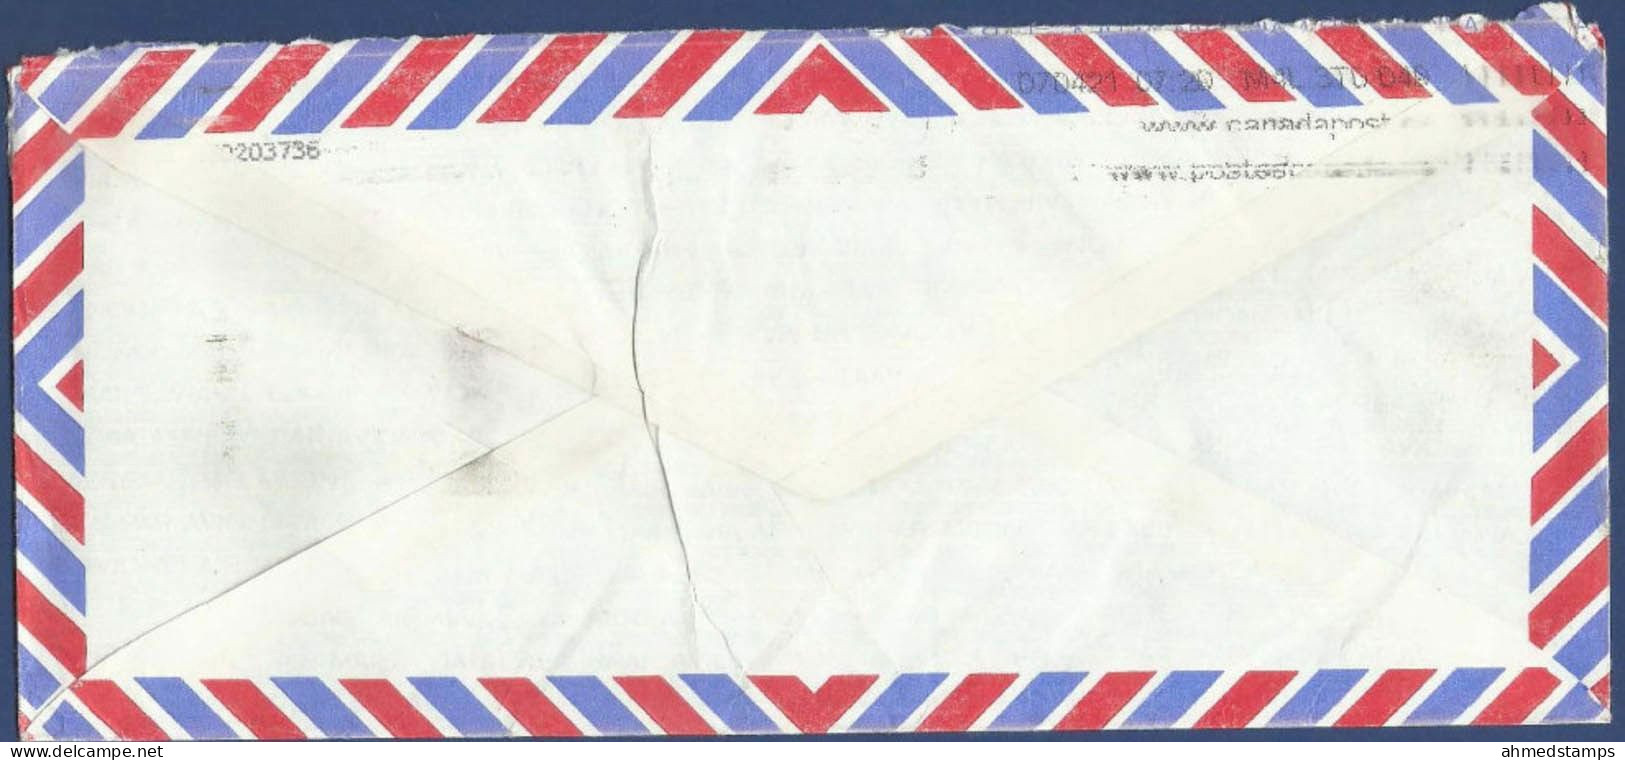 CANADA POSTAL USED AIRMAIL COVER TO UK UNITED KINGDOM - Luchtpost